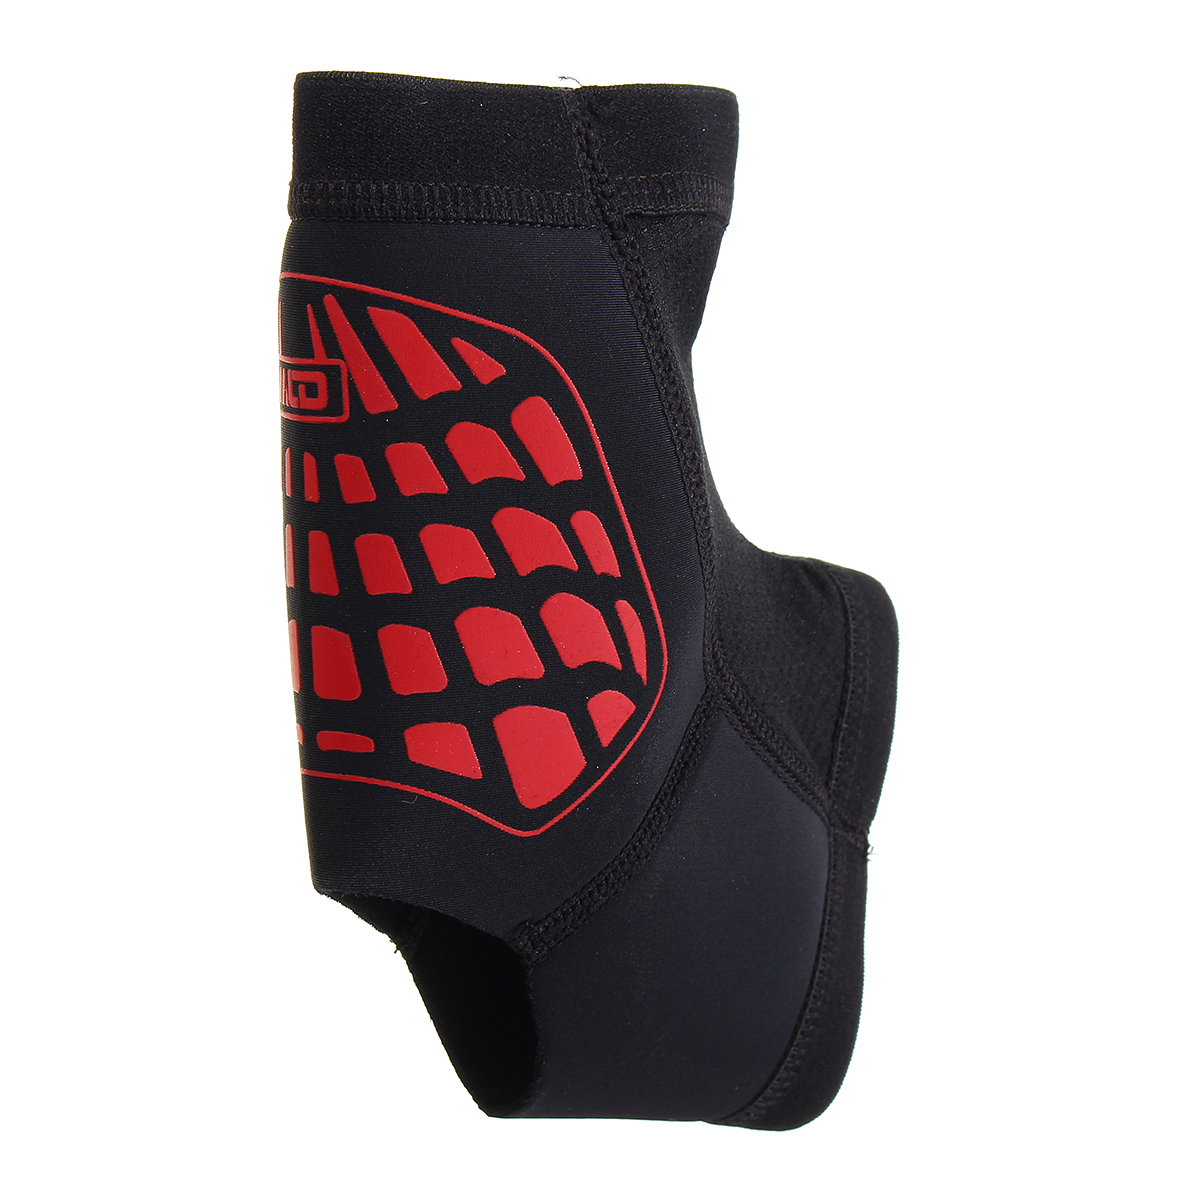 Single-Basketball-Cycling-Running-Ankle-Pad-Brace-Sports-Exercise-Protector-1130134-5